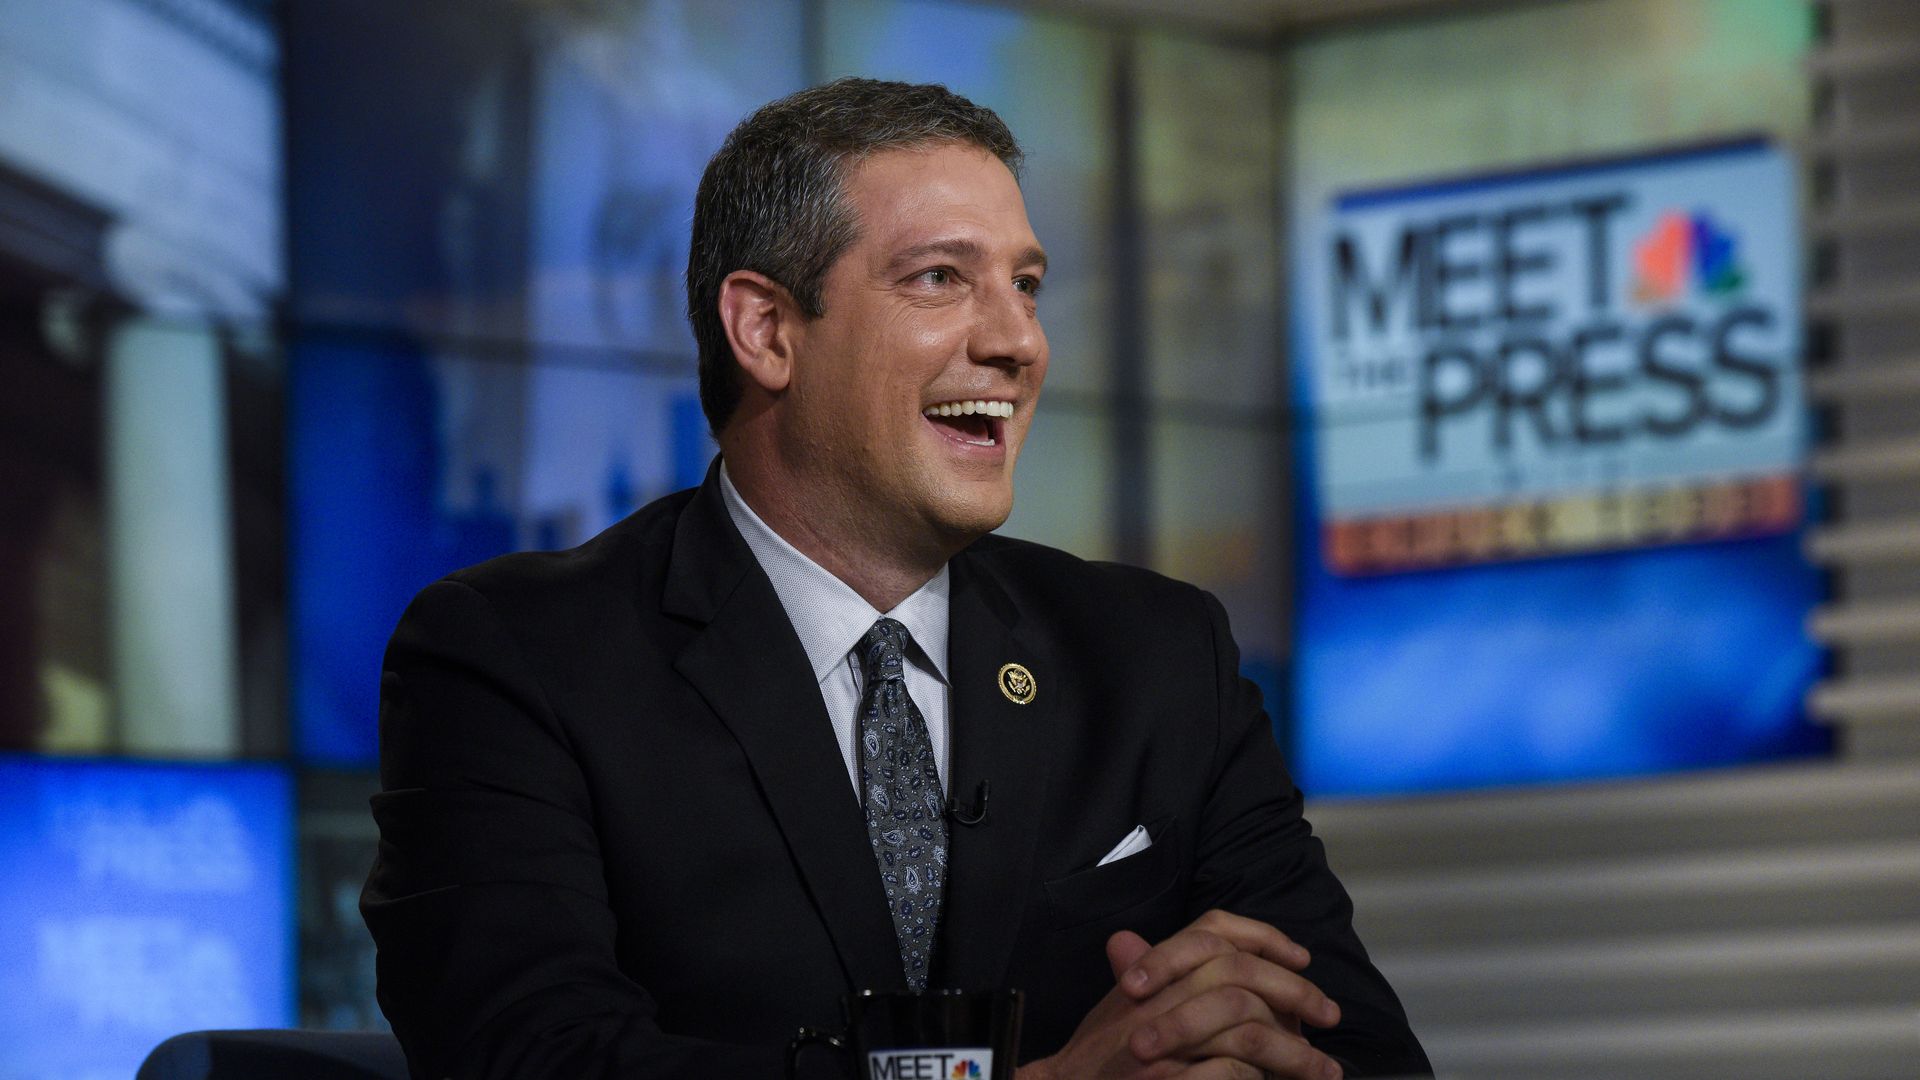 Tim Ryan is pictured here laughing on the set of Meet the Press. 